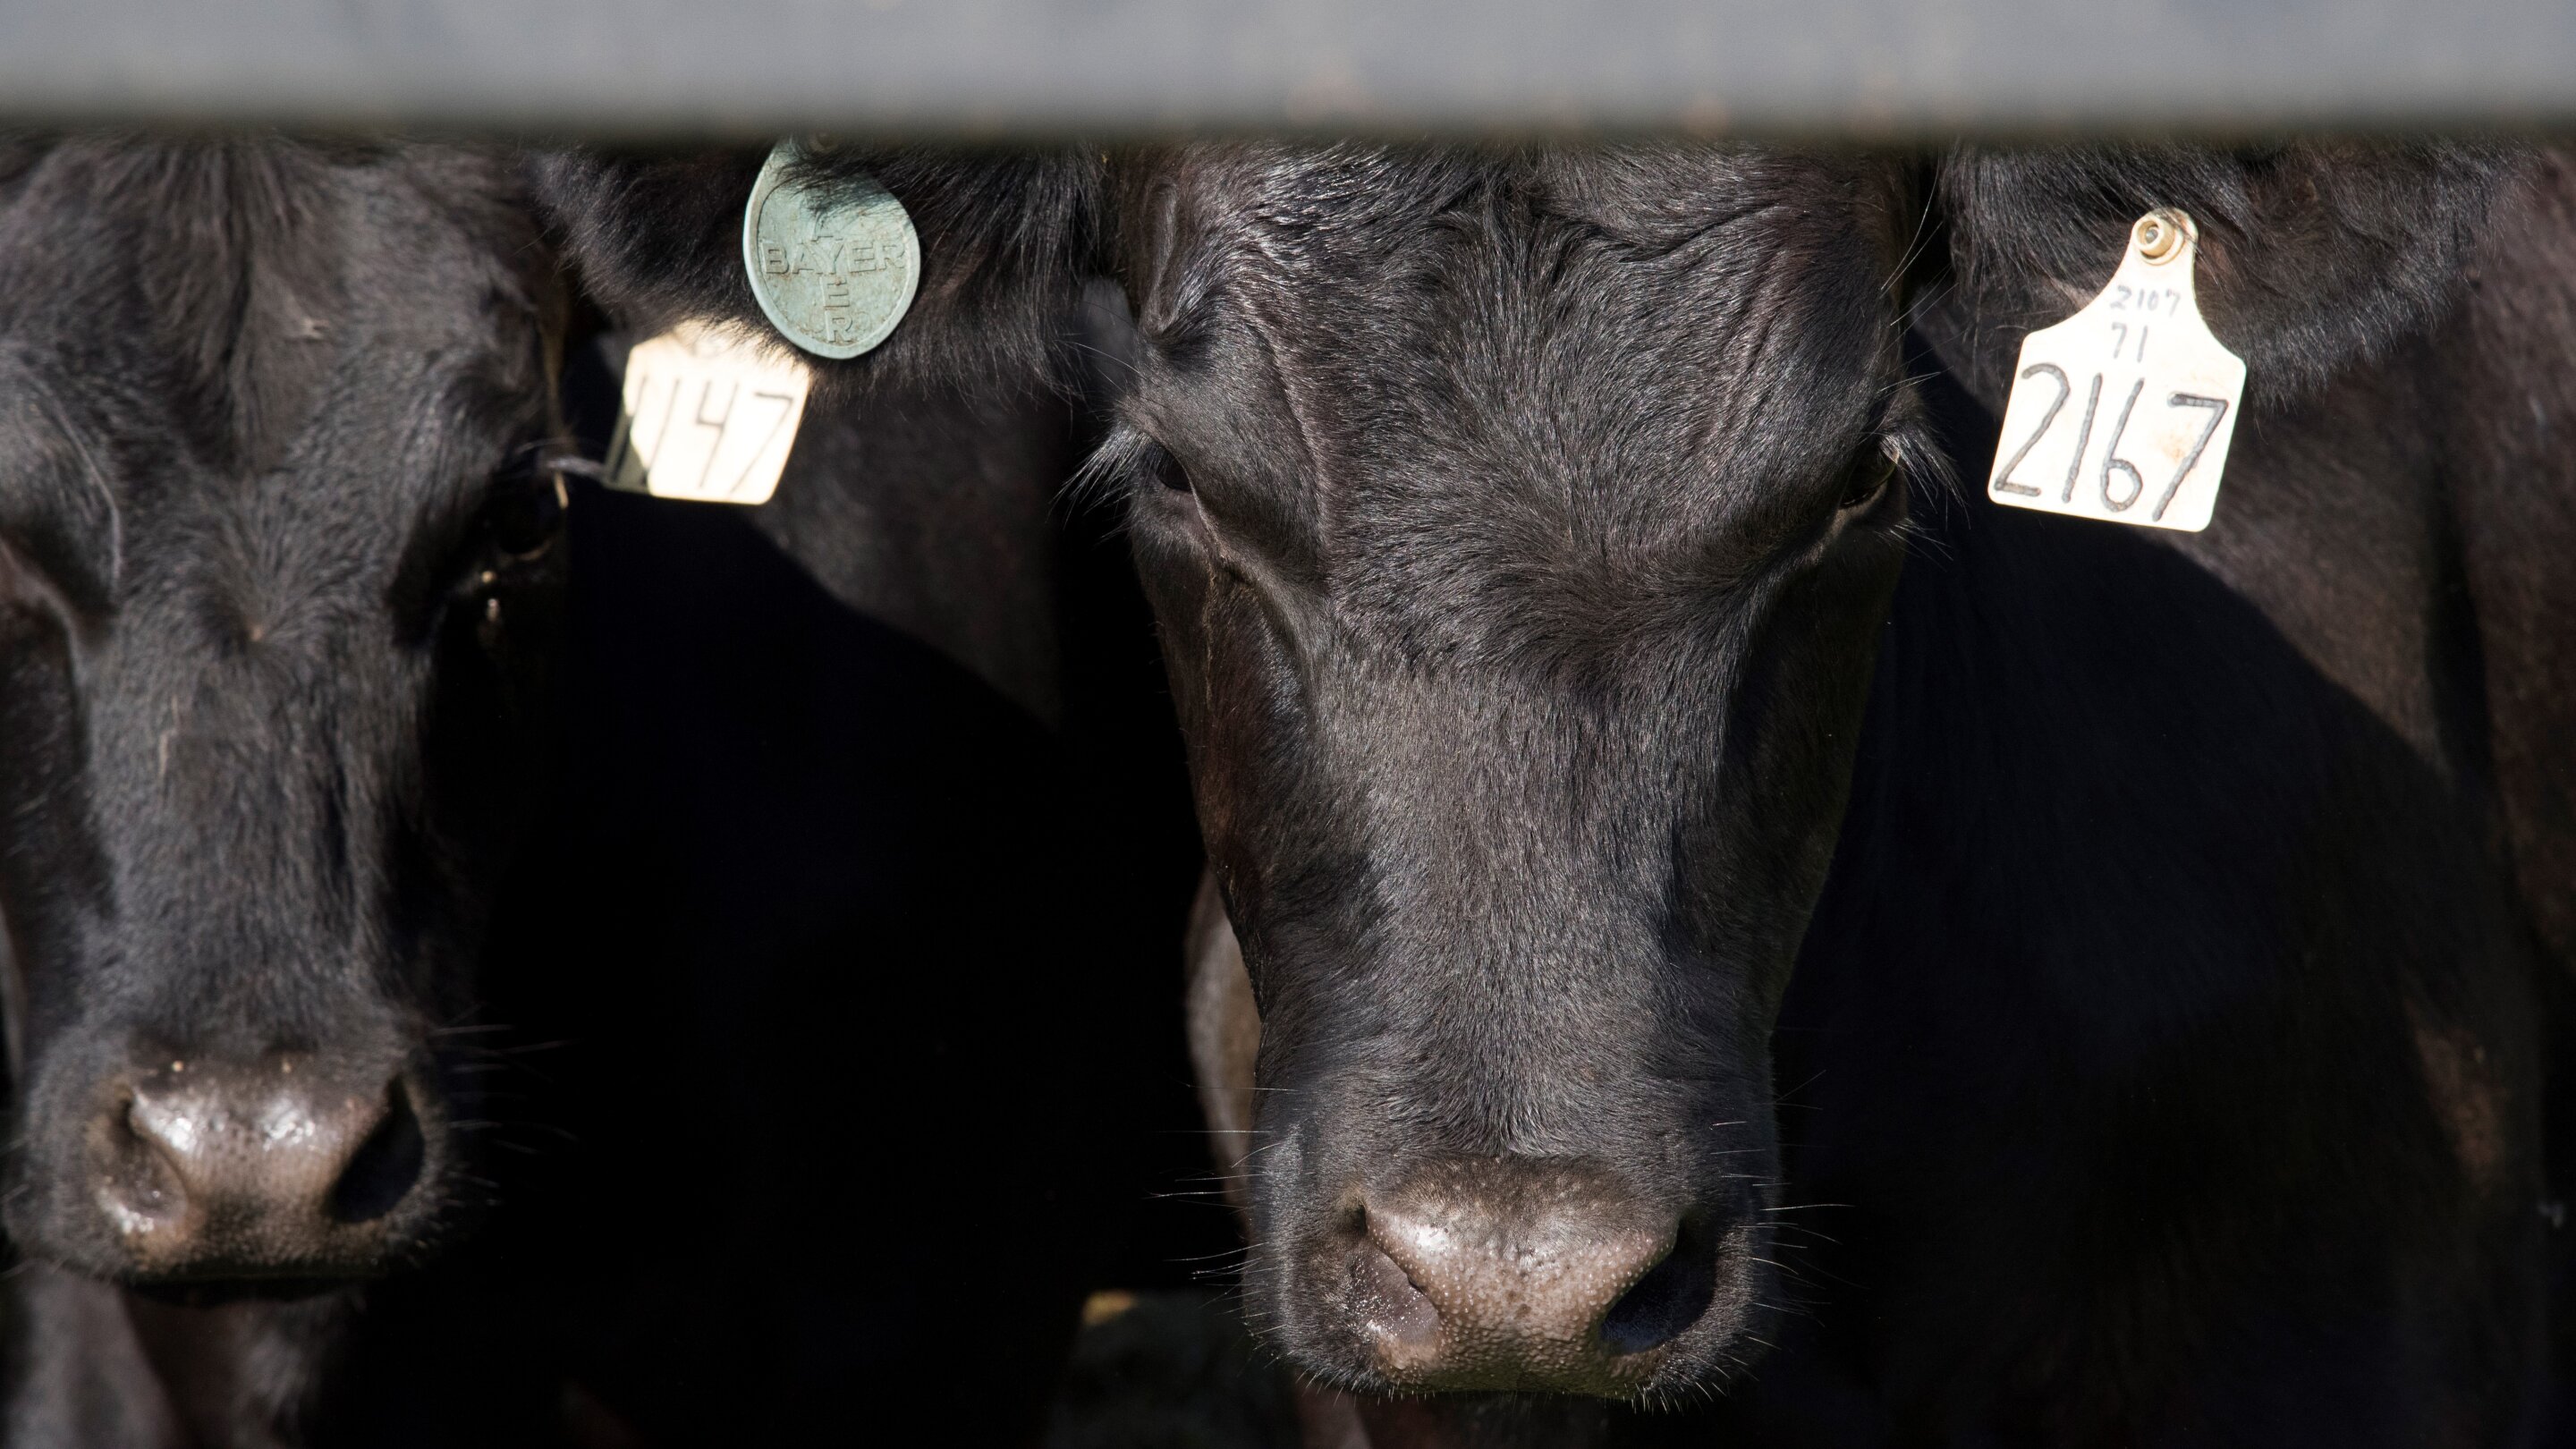 Researchers analyze price ranges from fed cattle negotiated cash sales